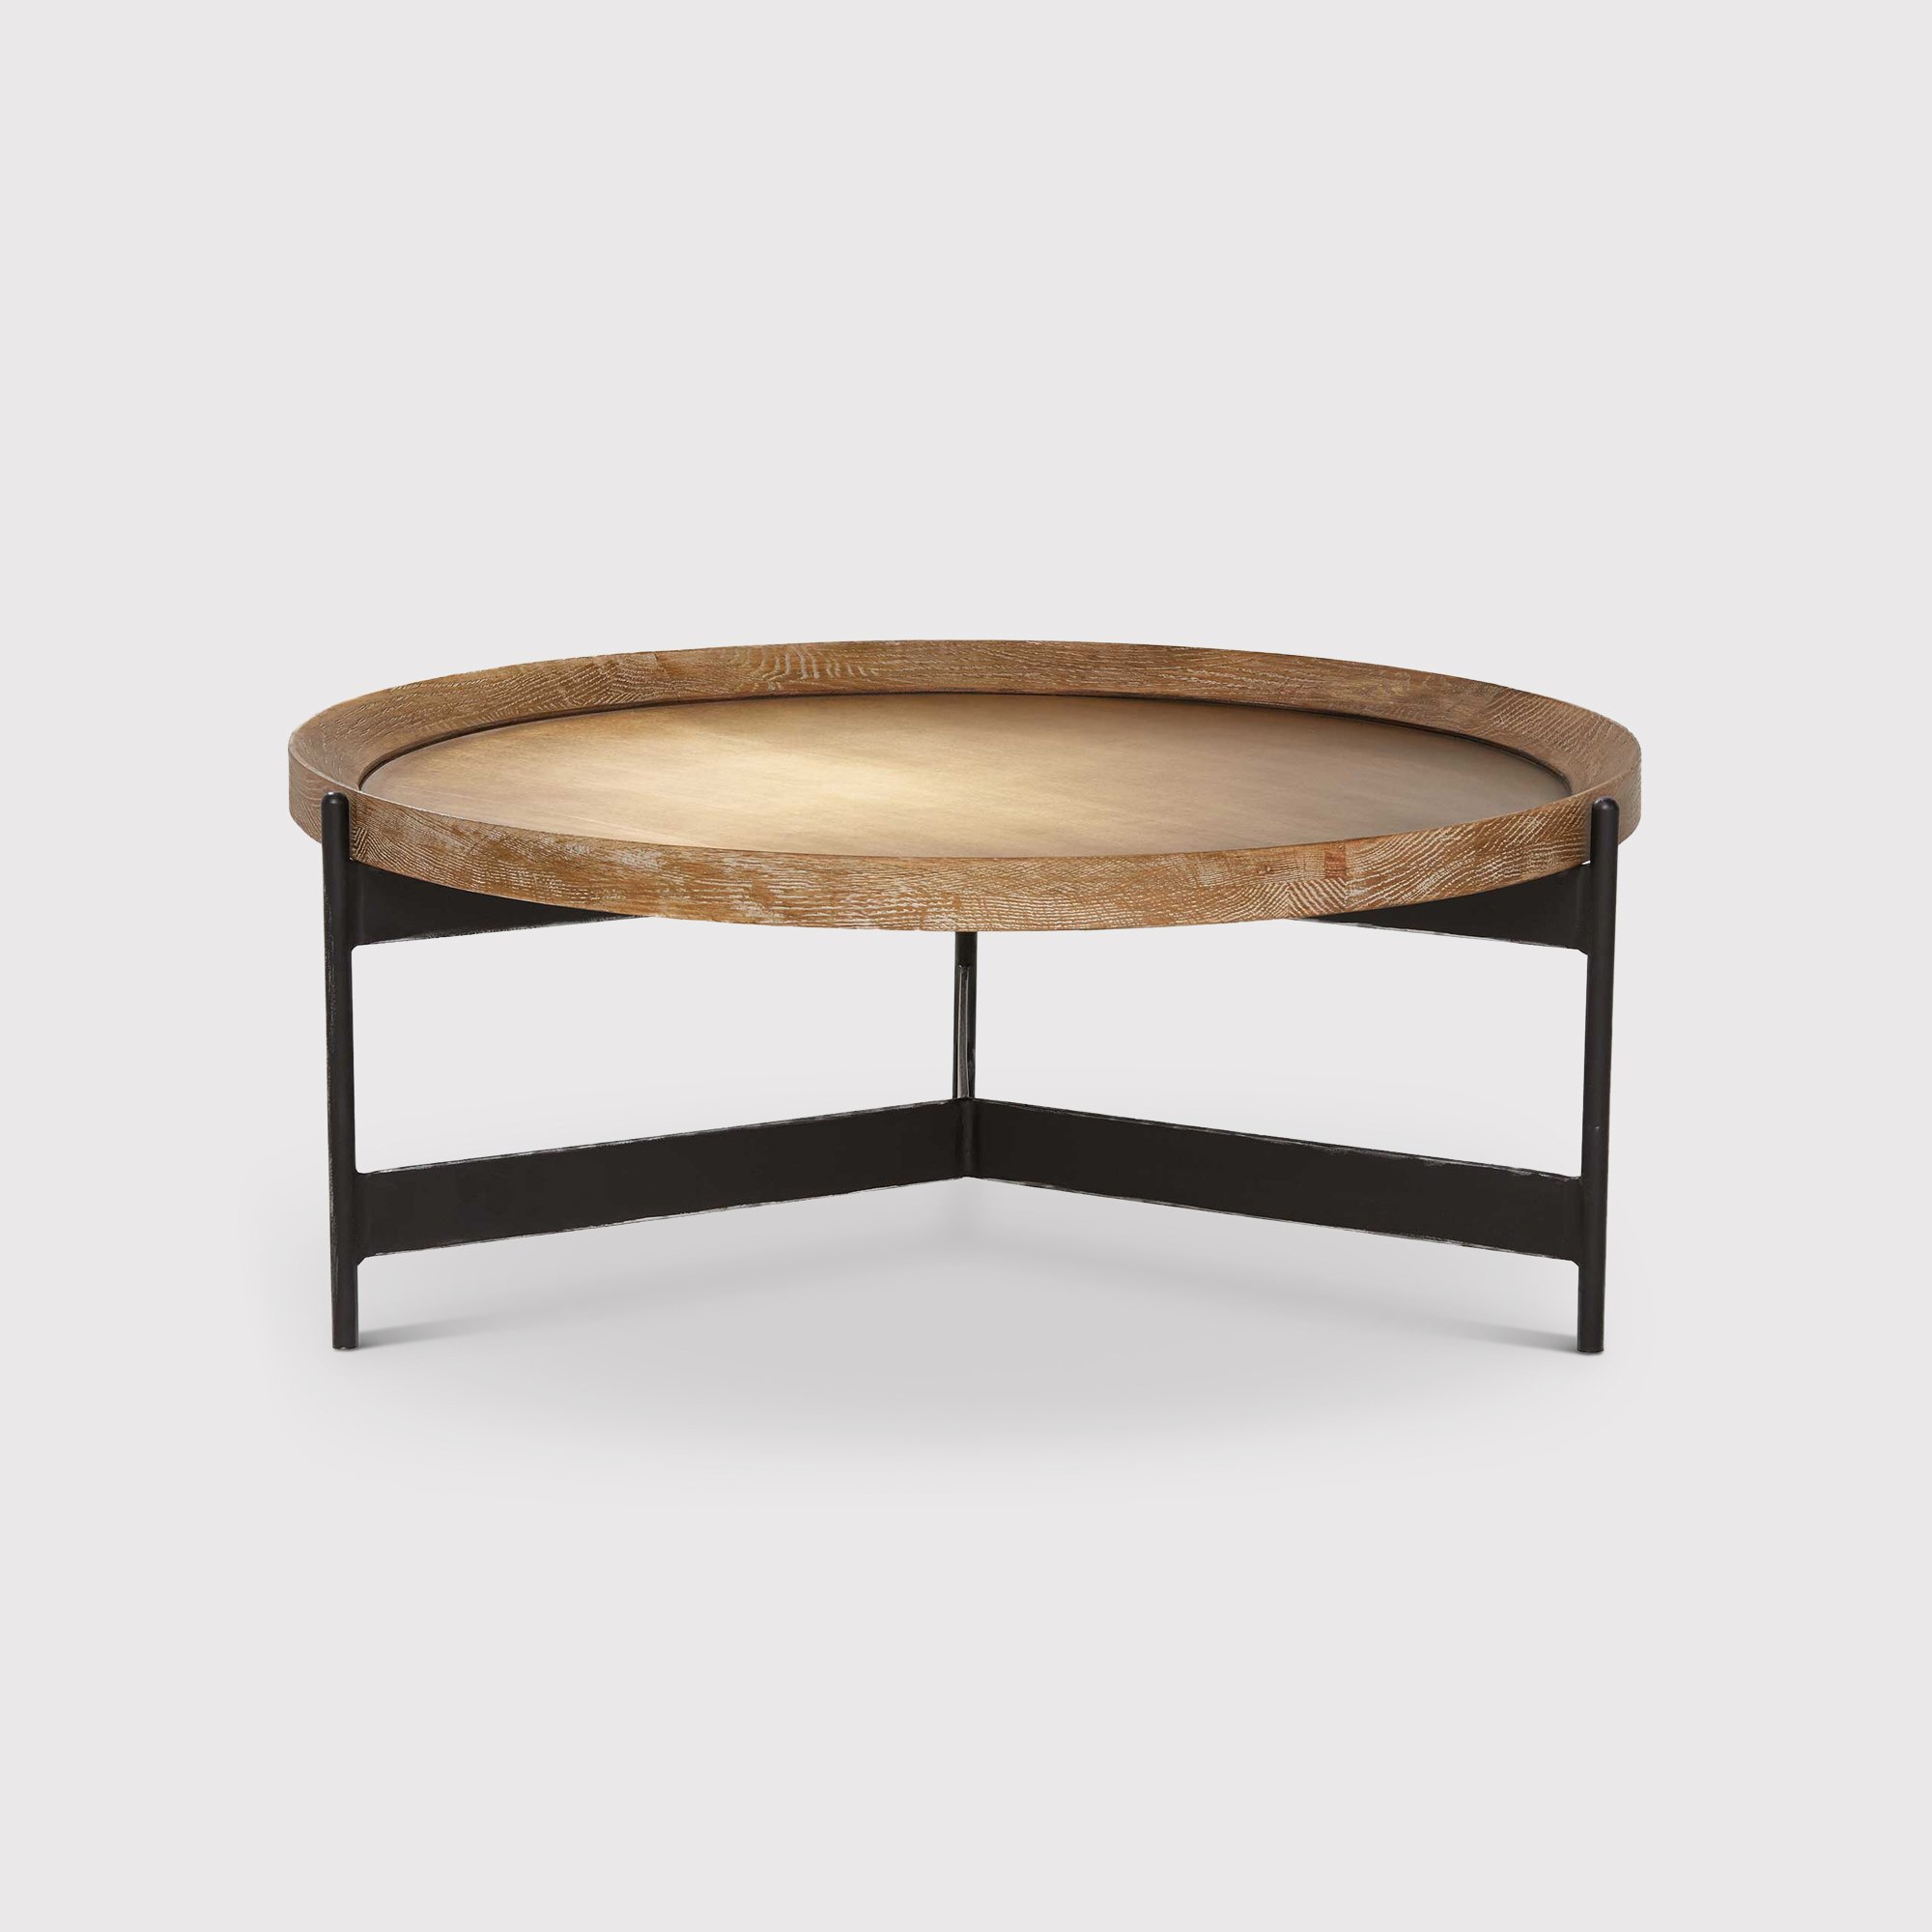 Zeke Edward Round Coffee Table 80cm, Brown | Barker & Stonehouse